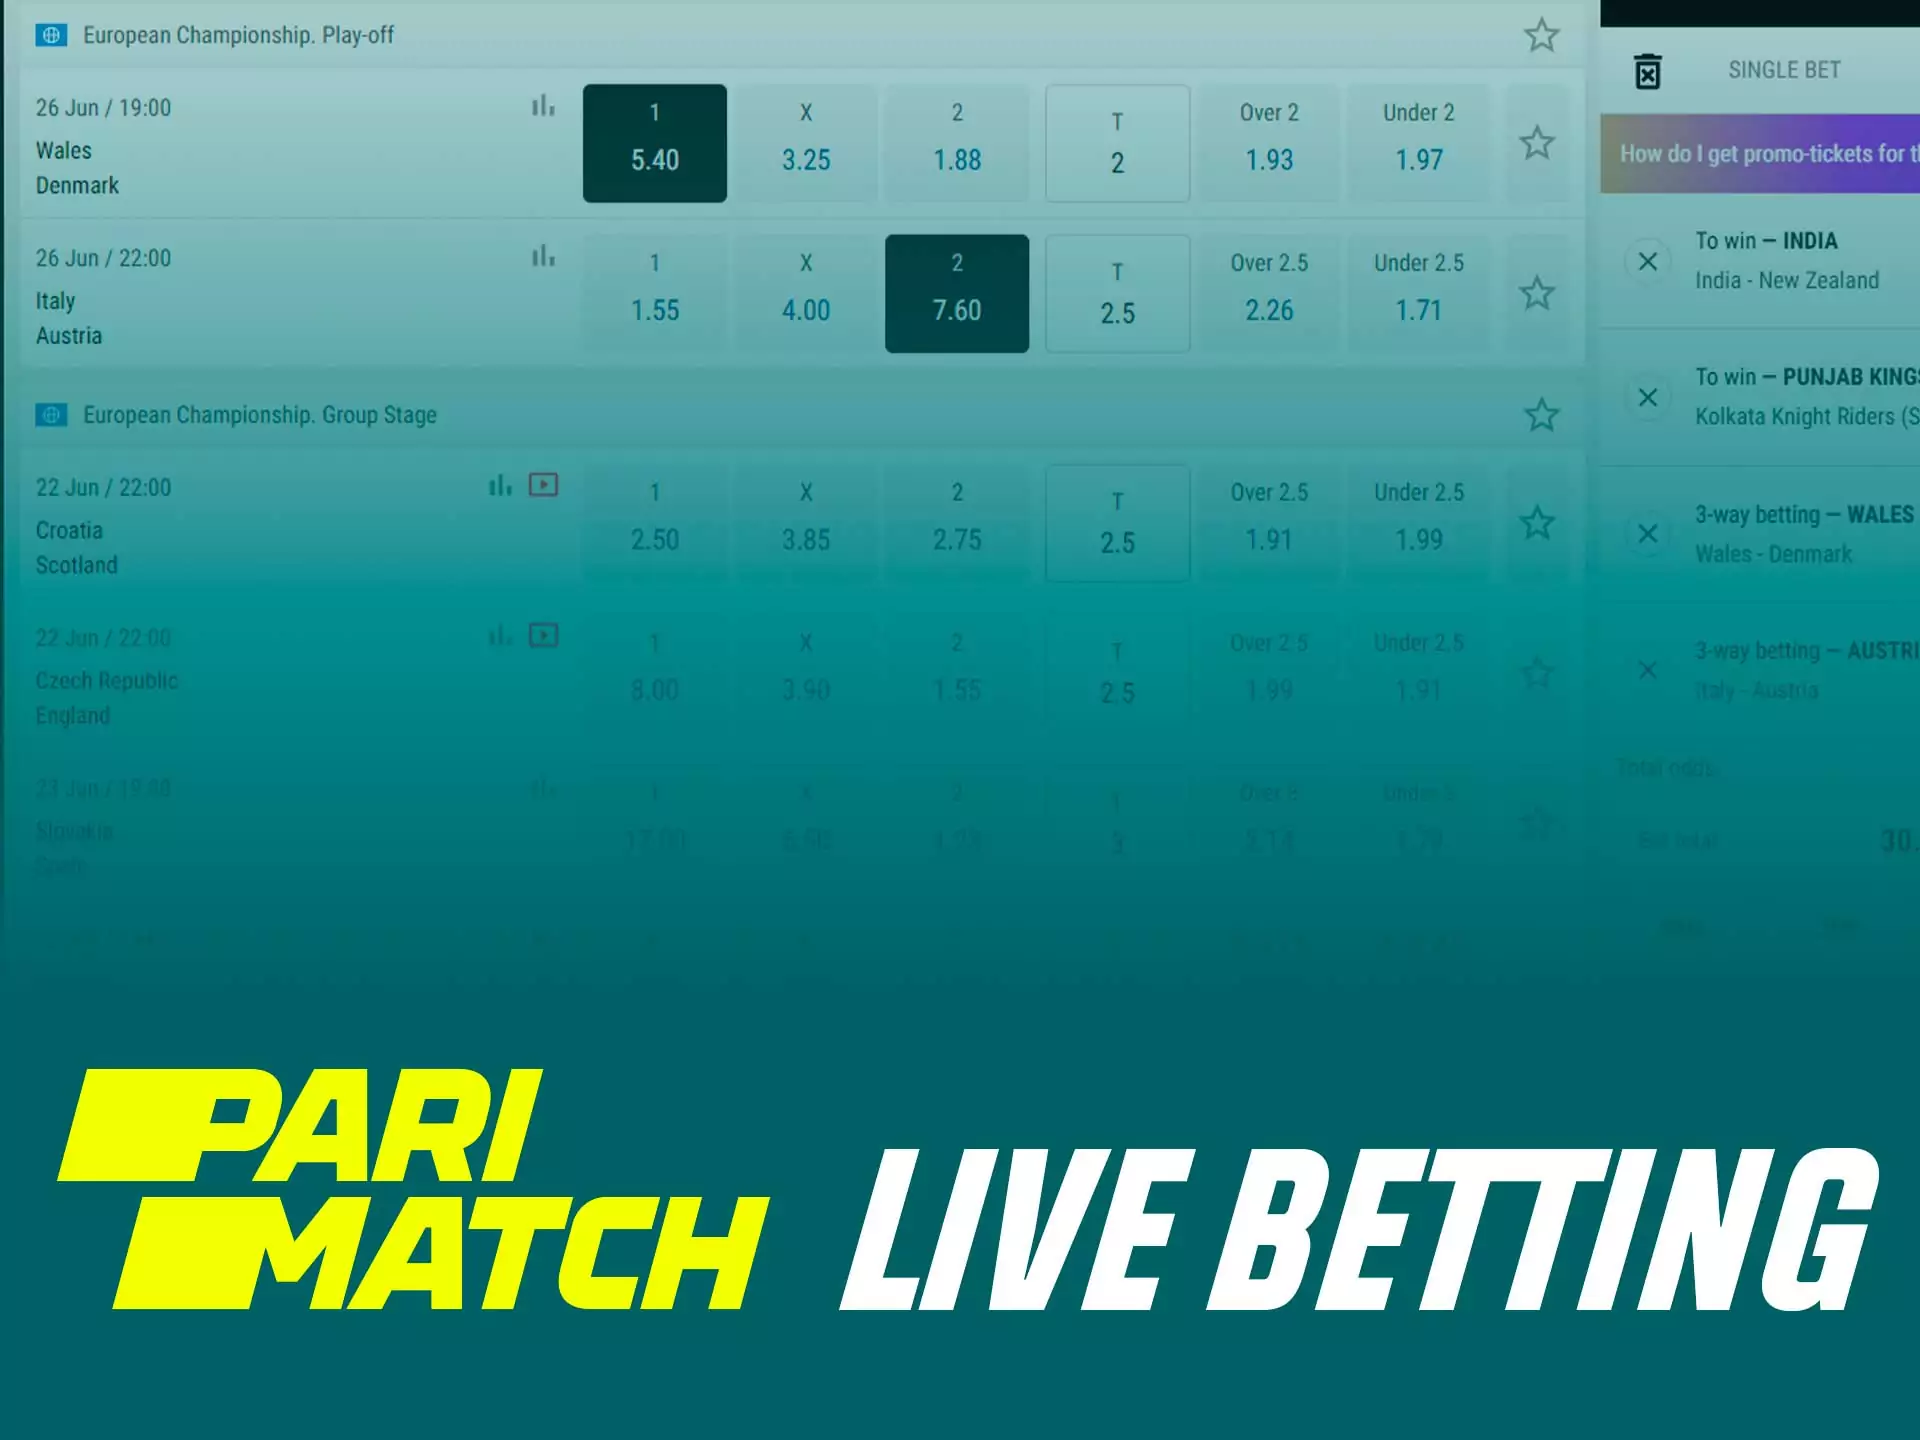 At Parimatch you can watch streamings of the matches and place bets simultaniously.